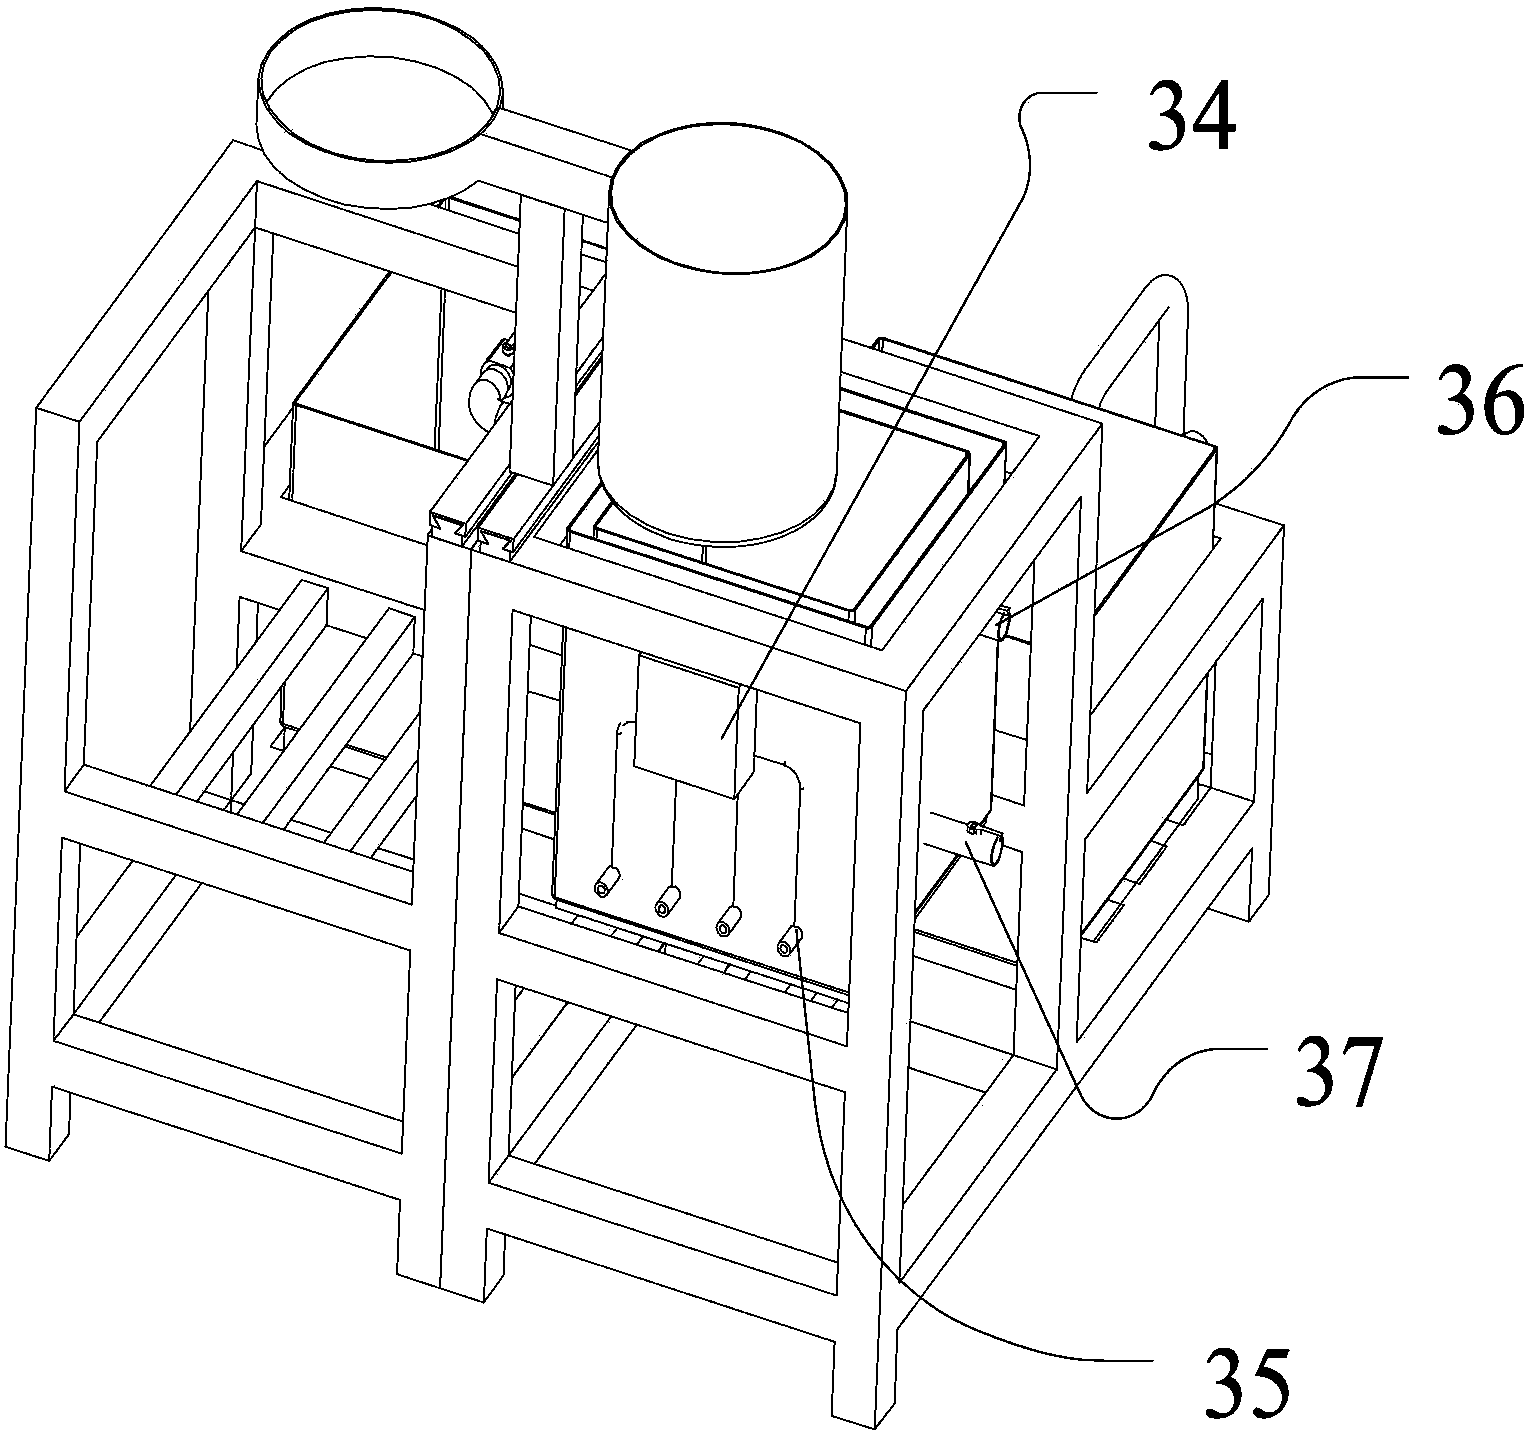 Treatment device for separating polyurethane waste material